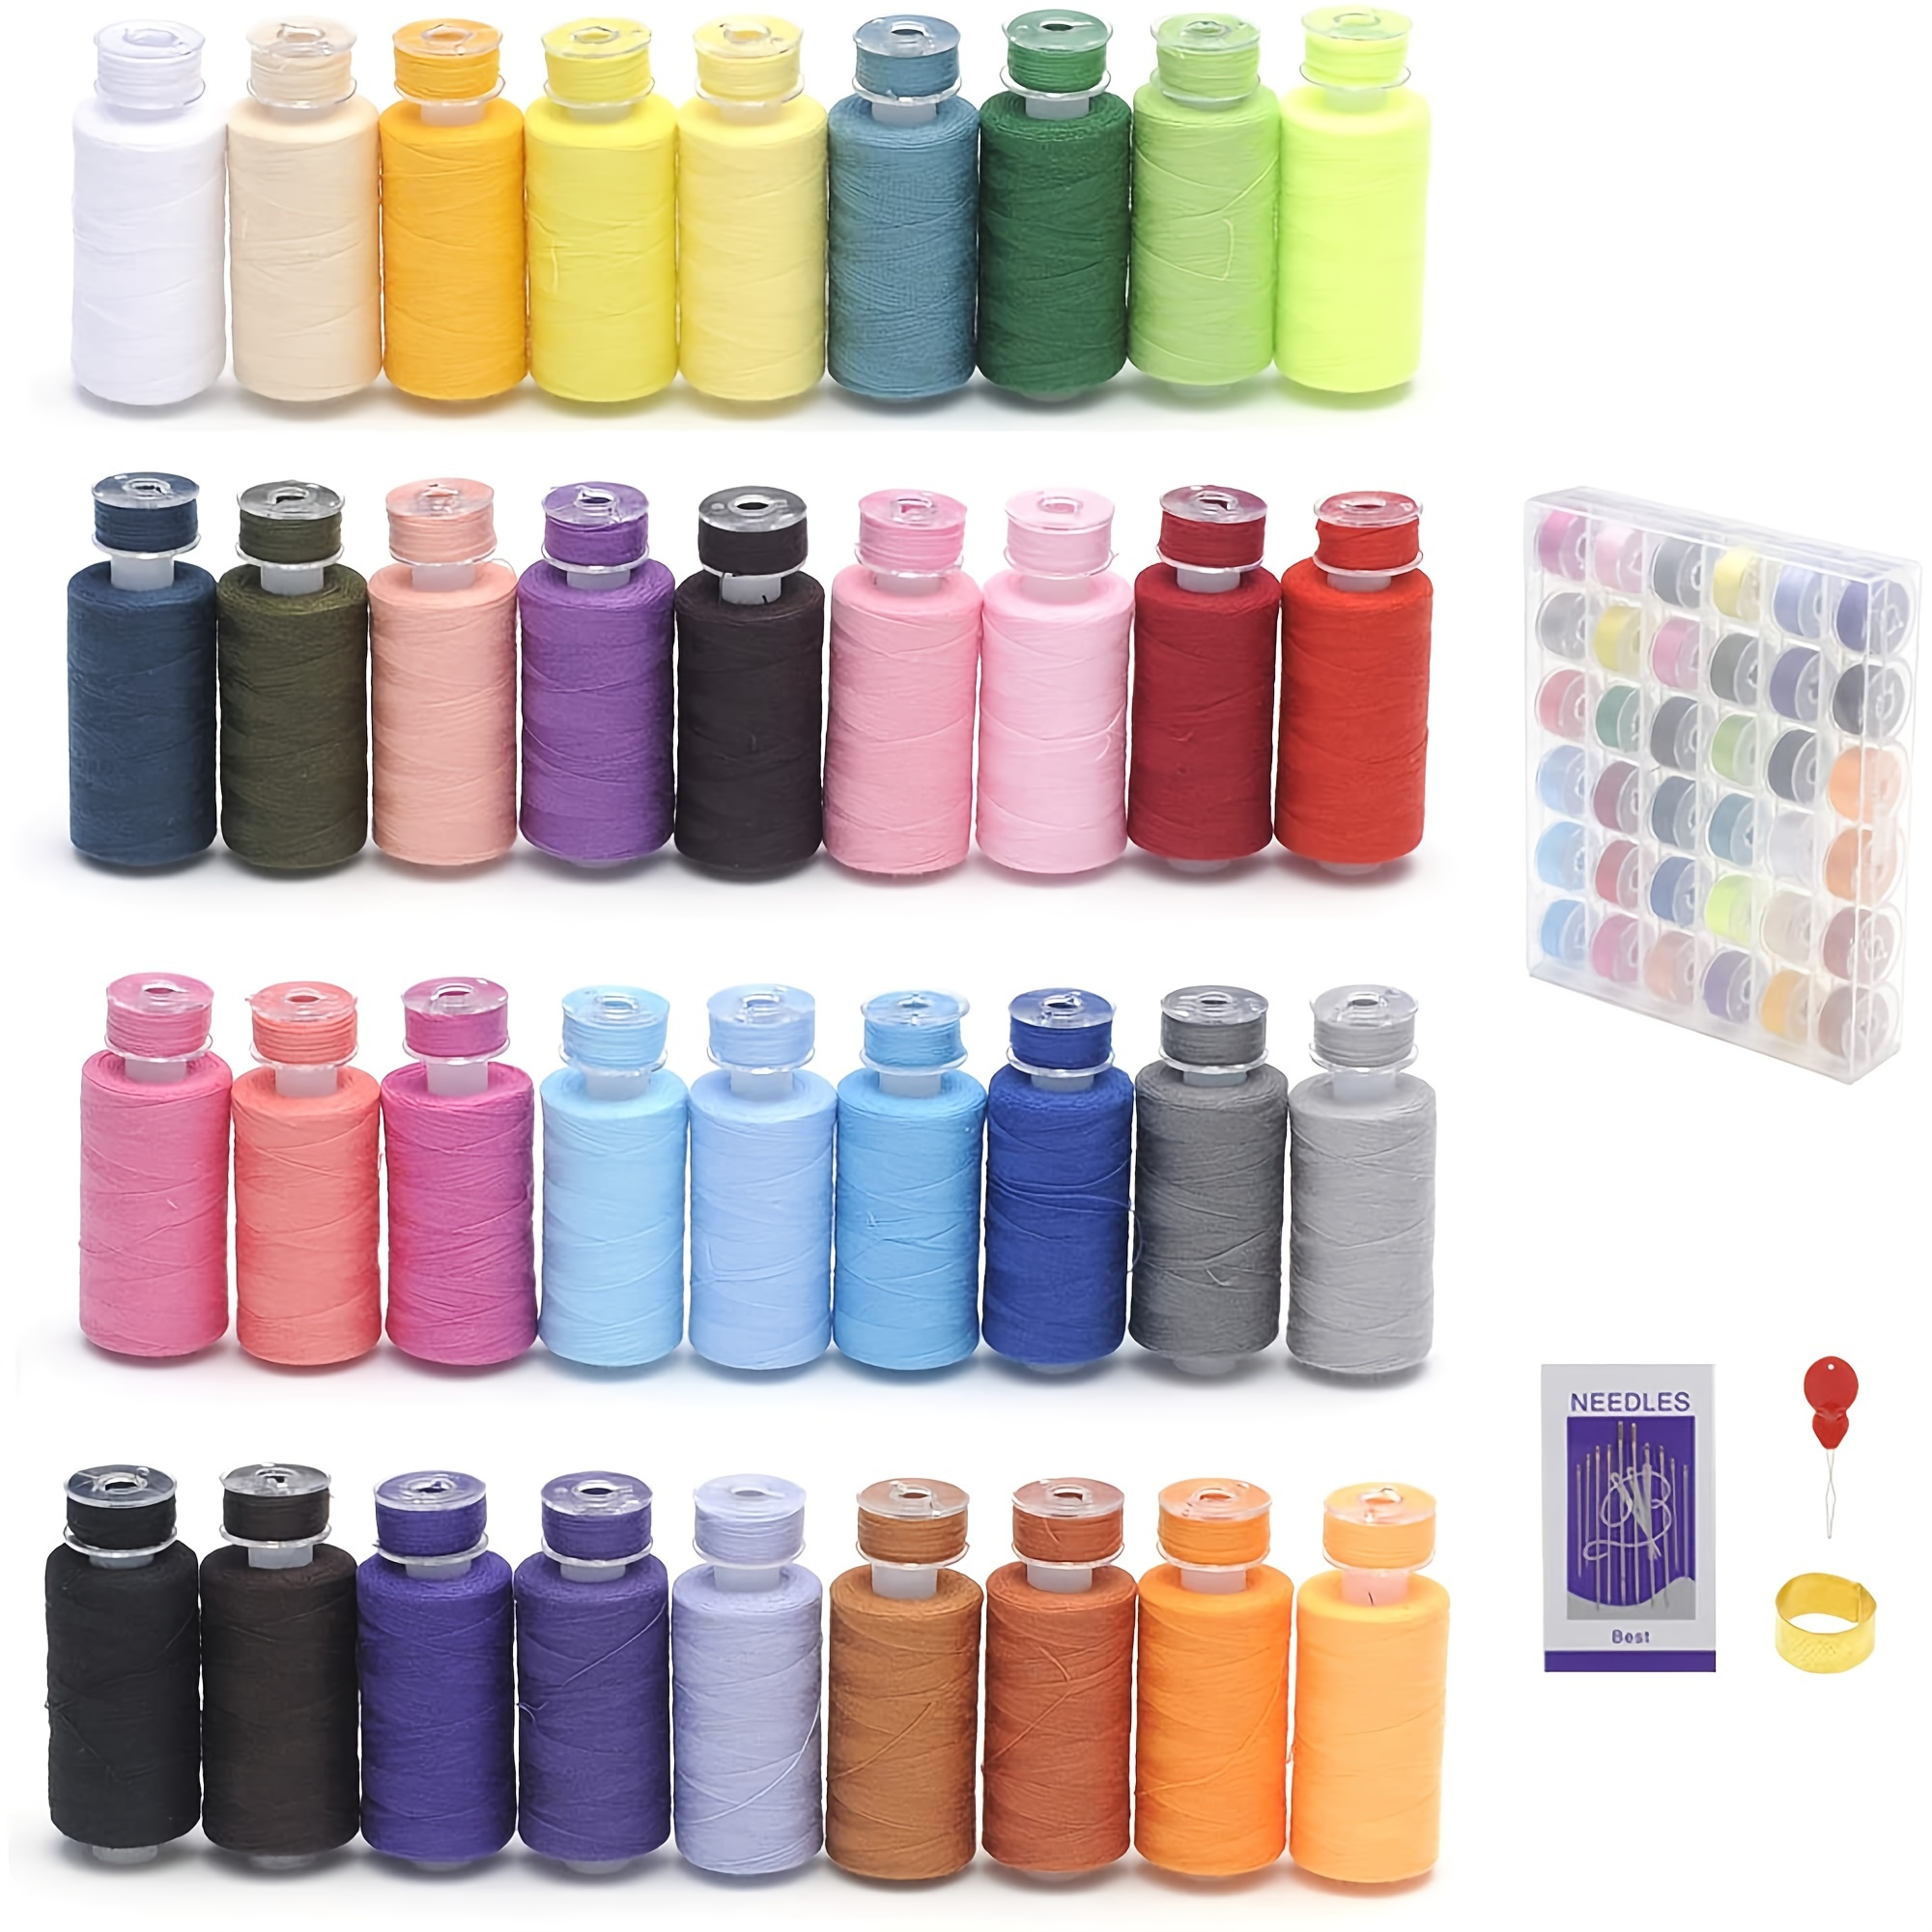 Wholesale 10pc Sewing Thread Set- Assorted Colors